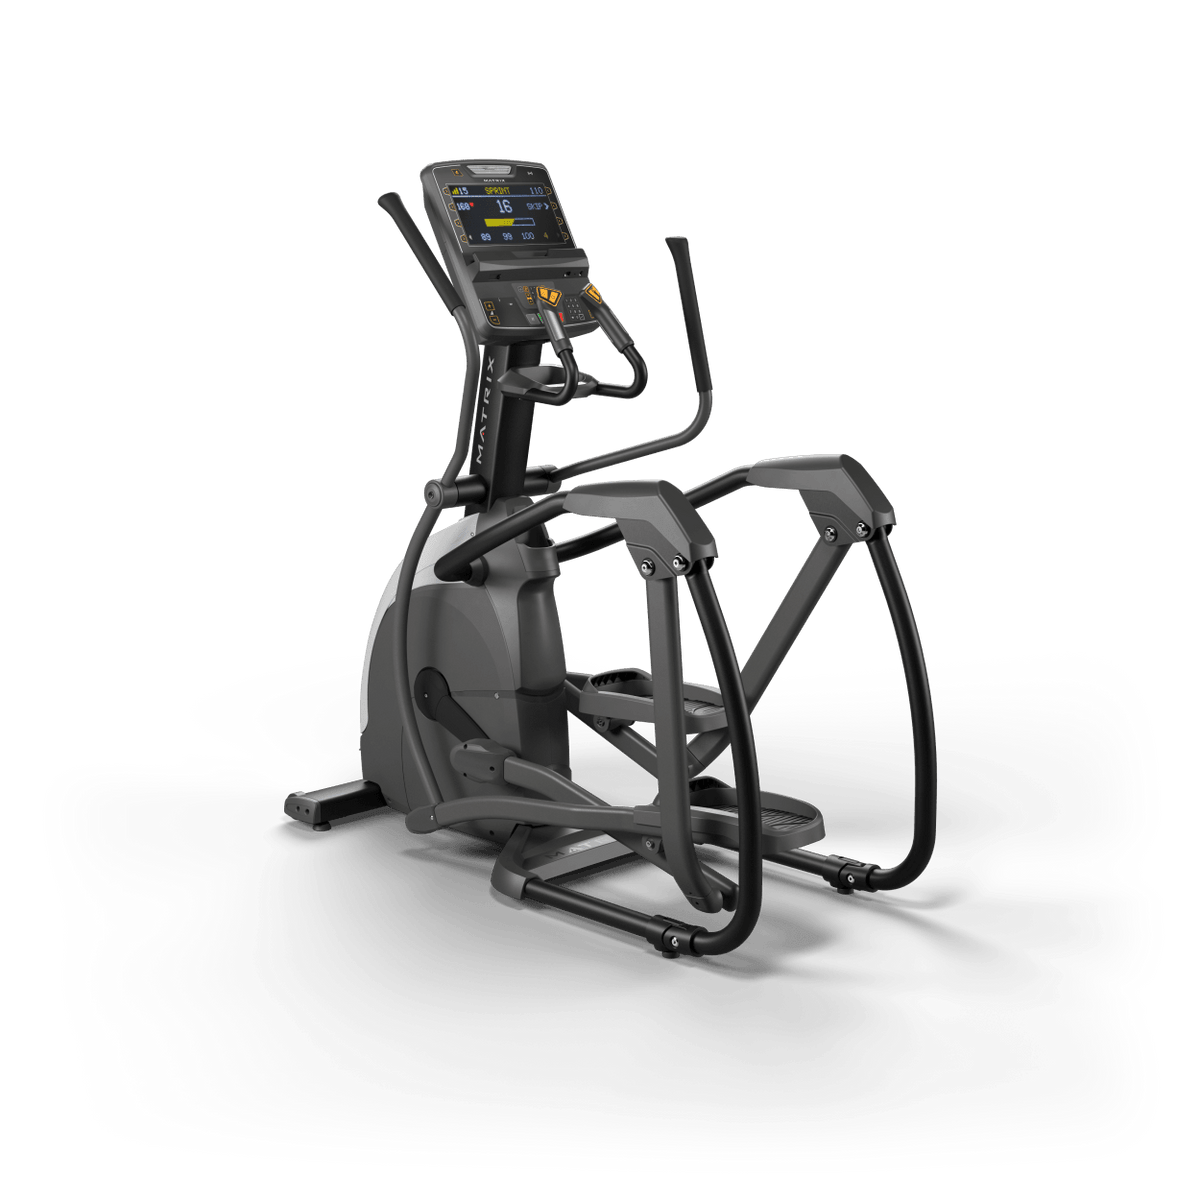 Matrix Fitness Endurance Elliptical with Premium LED Console full view | Fitness Experience